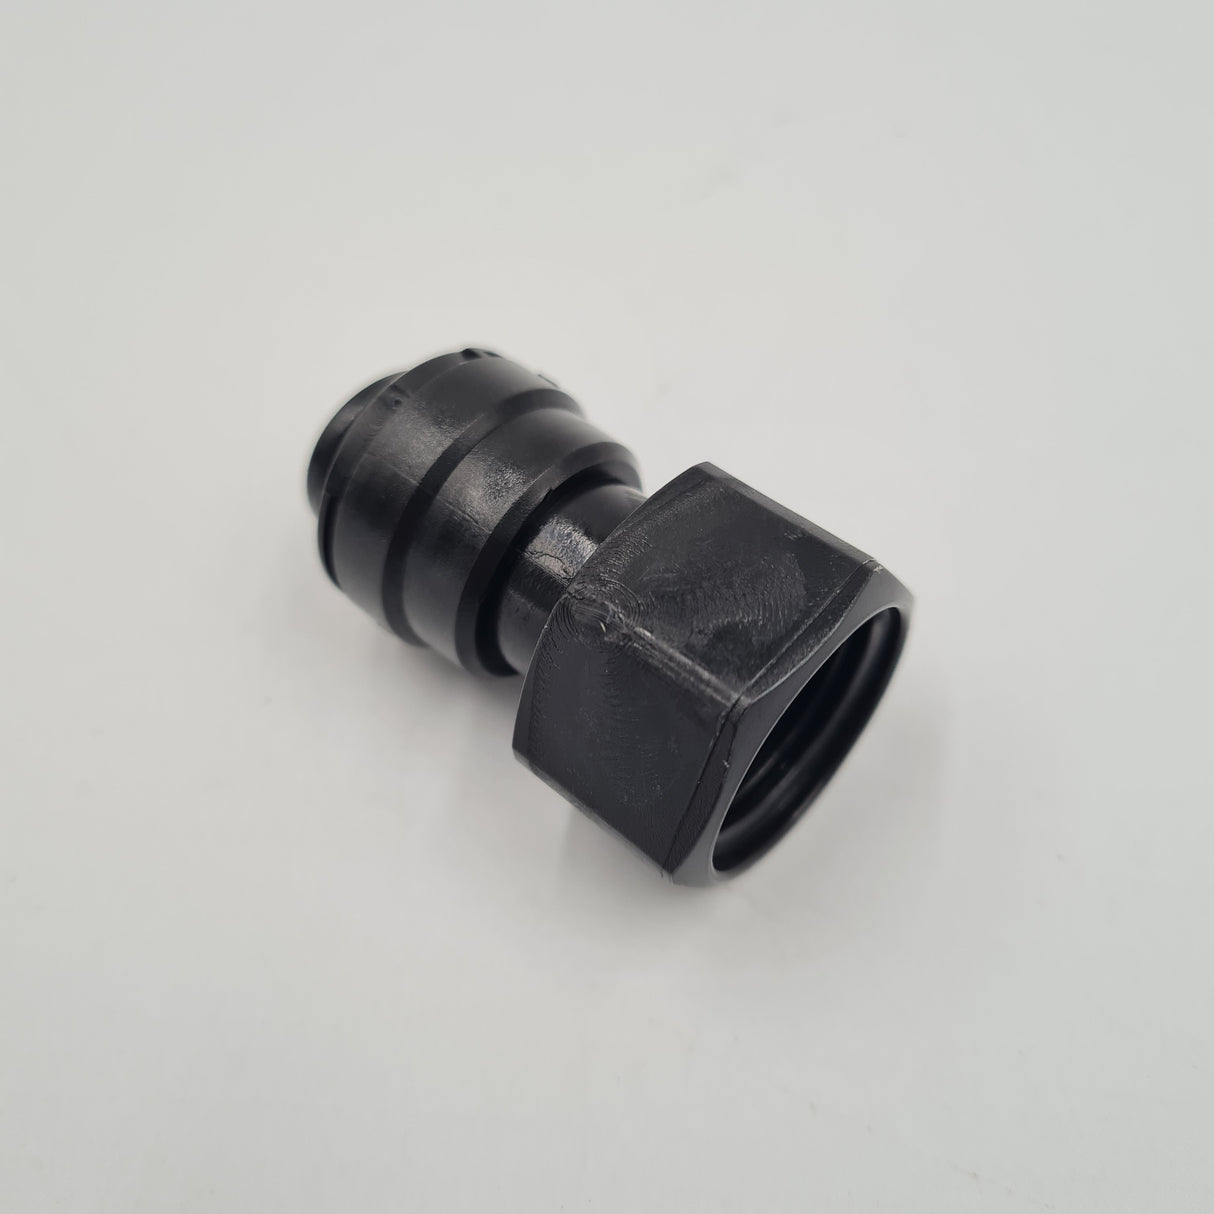 Female 1/2" BSP to 12mm Push Fit Water Adaptor - WS1232